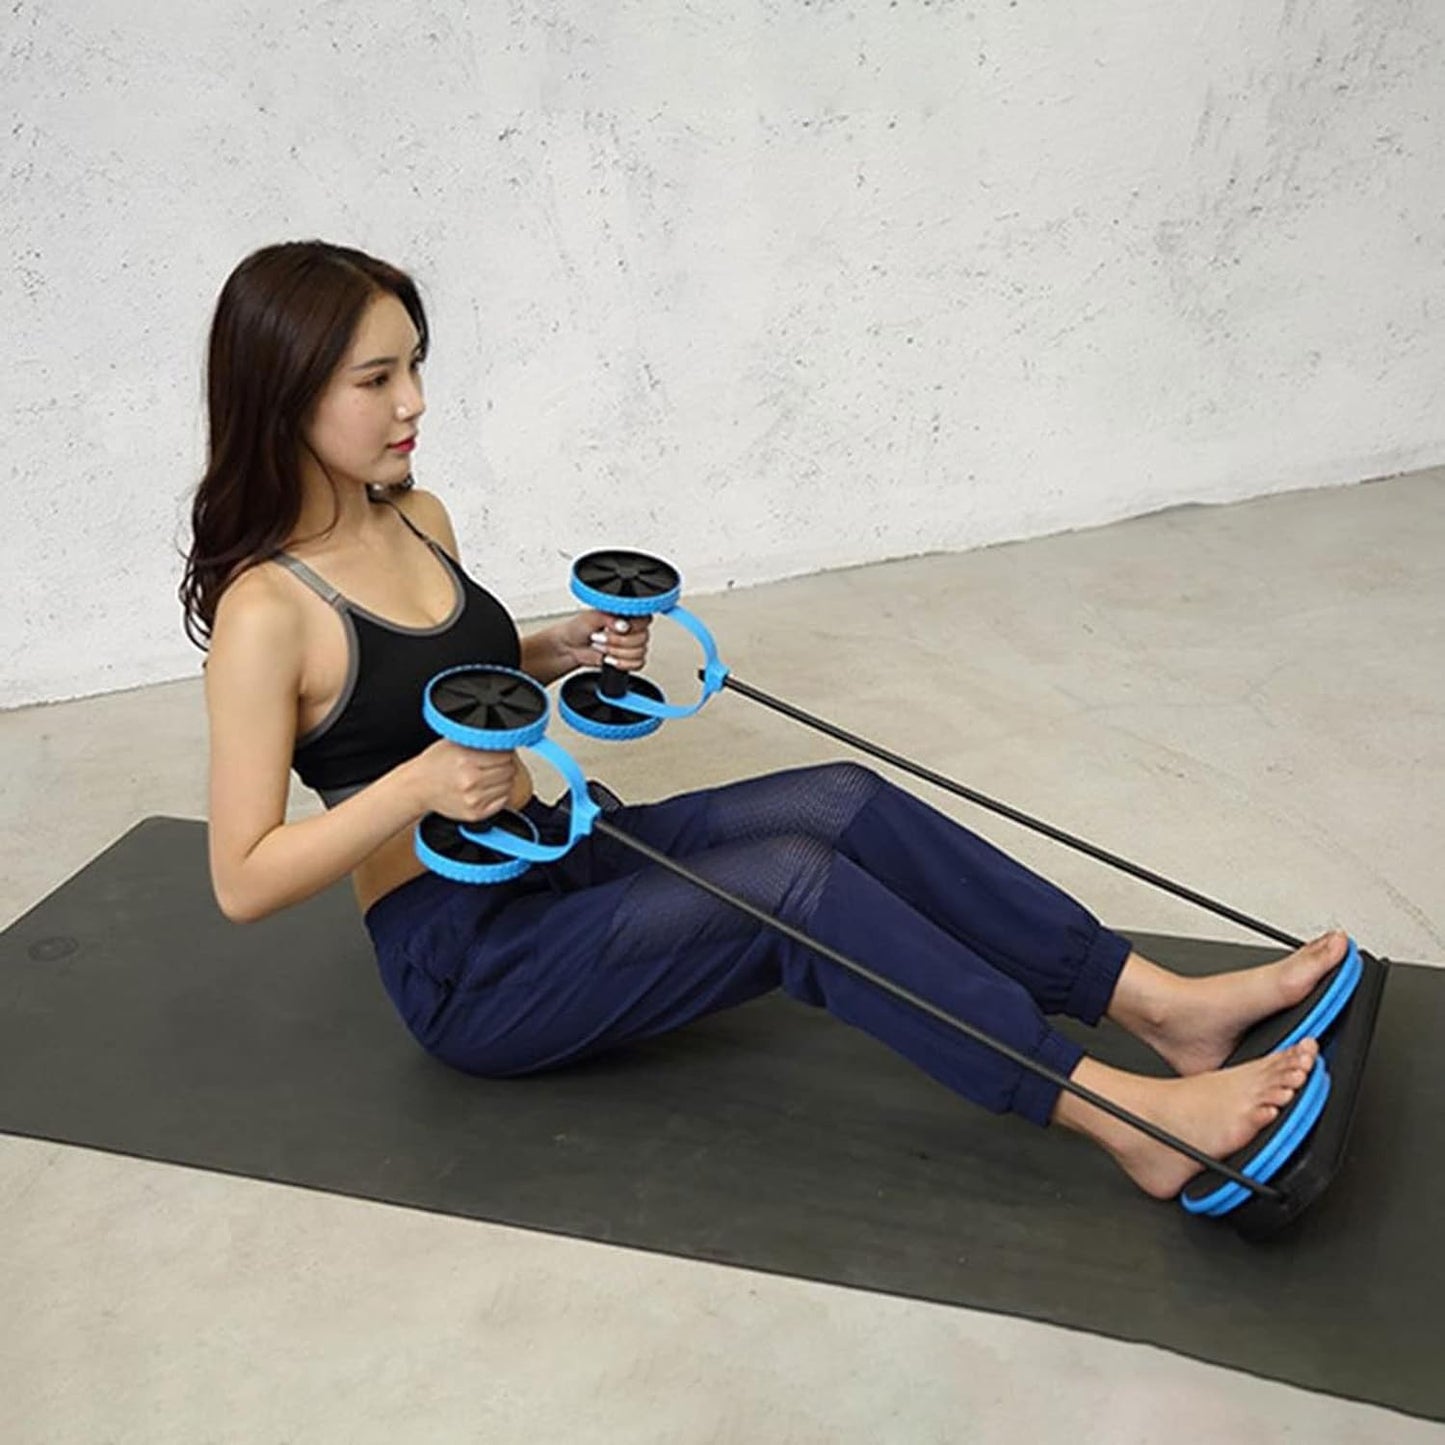 Wheel Roller with Knee Pad for Core Workouts